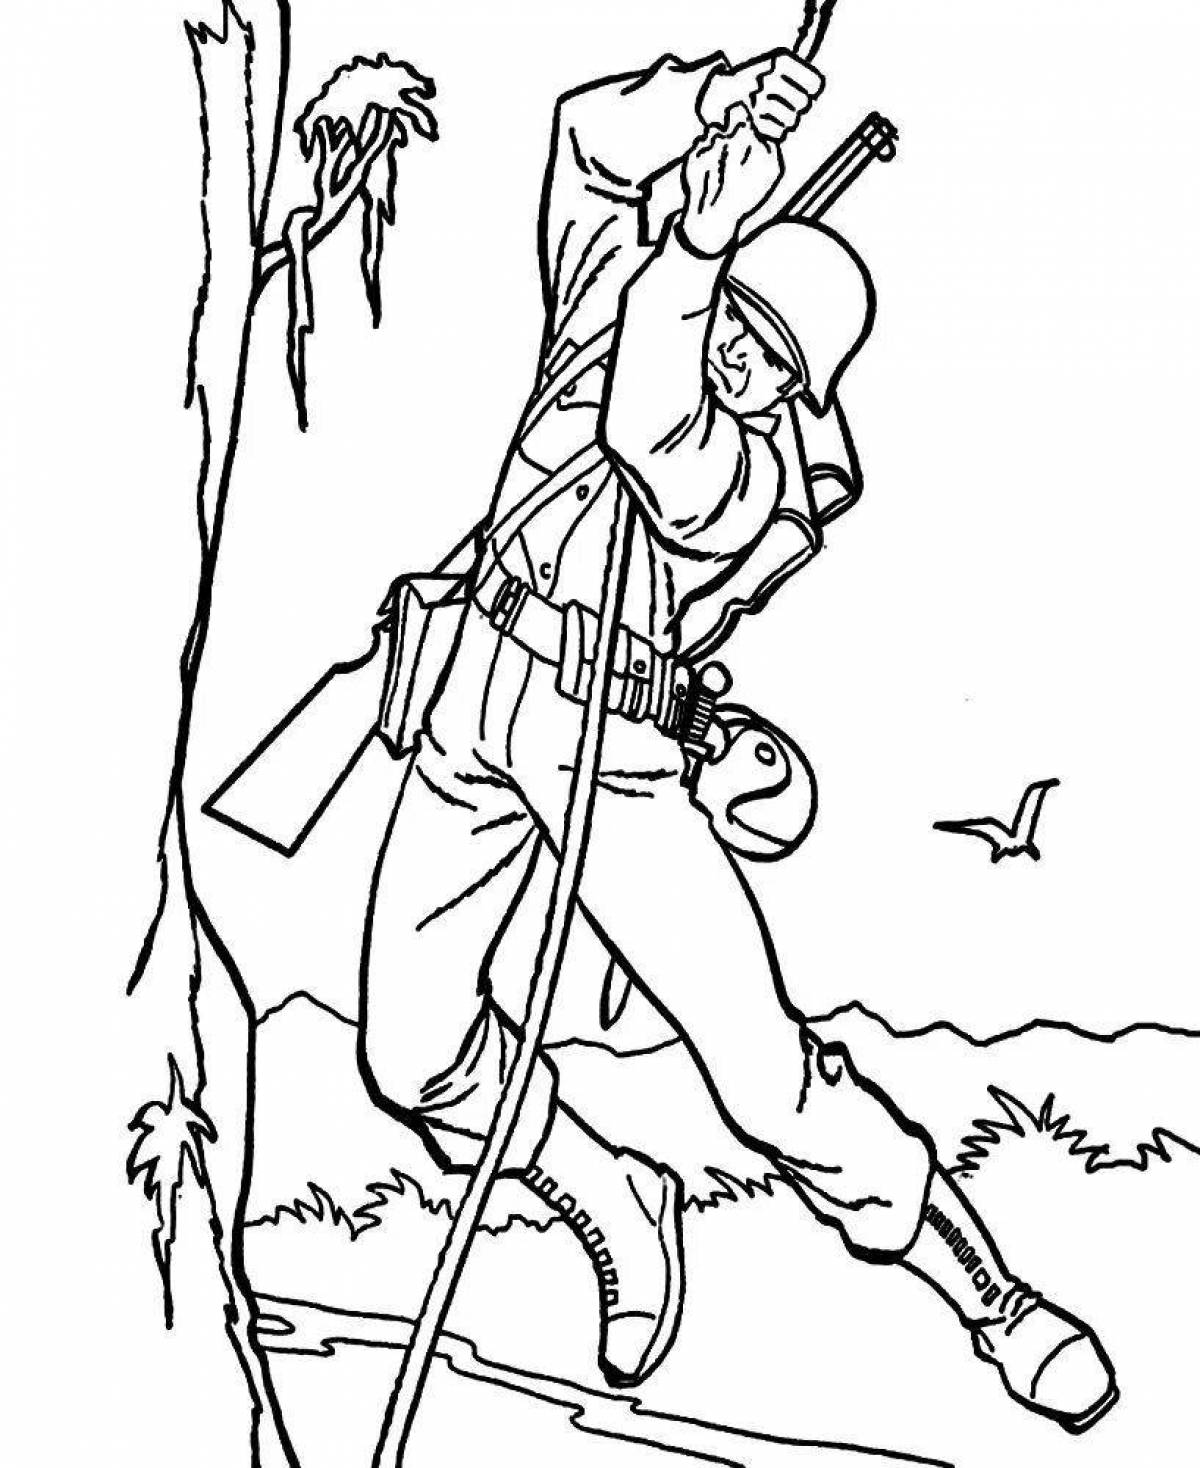 Glowing war coloring page